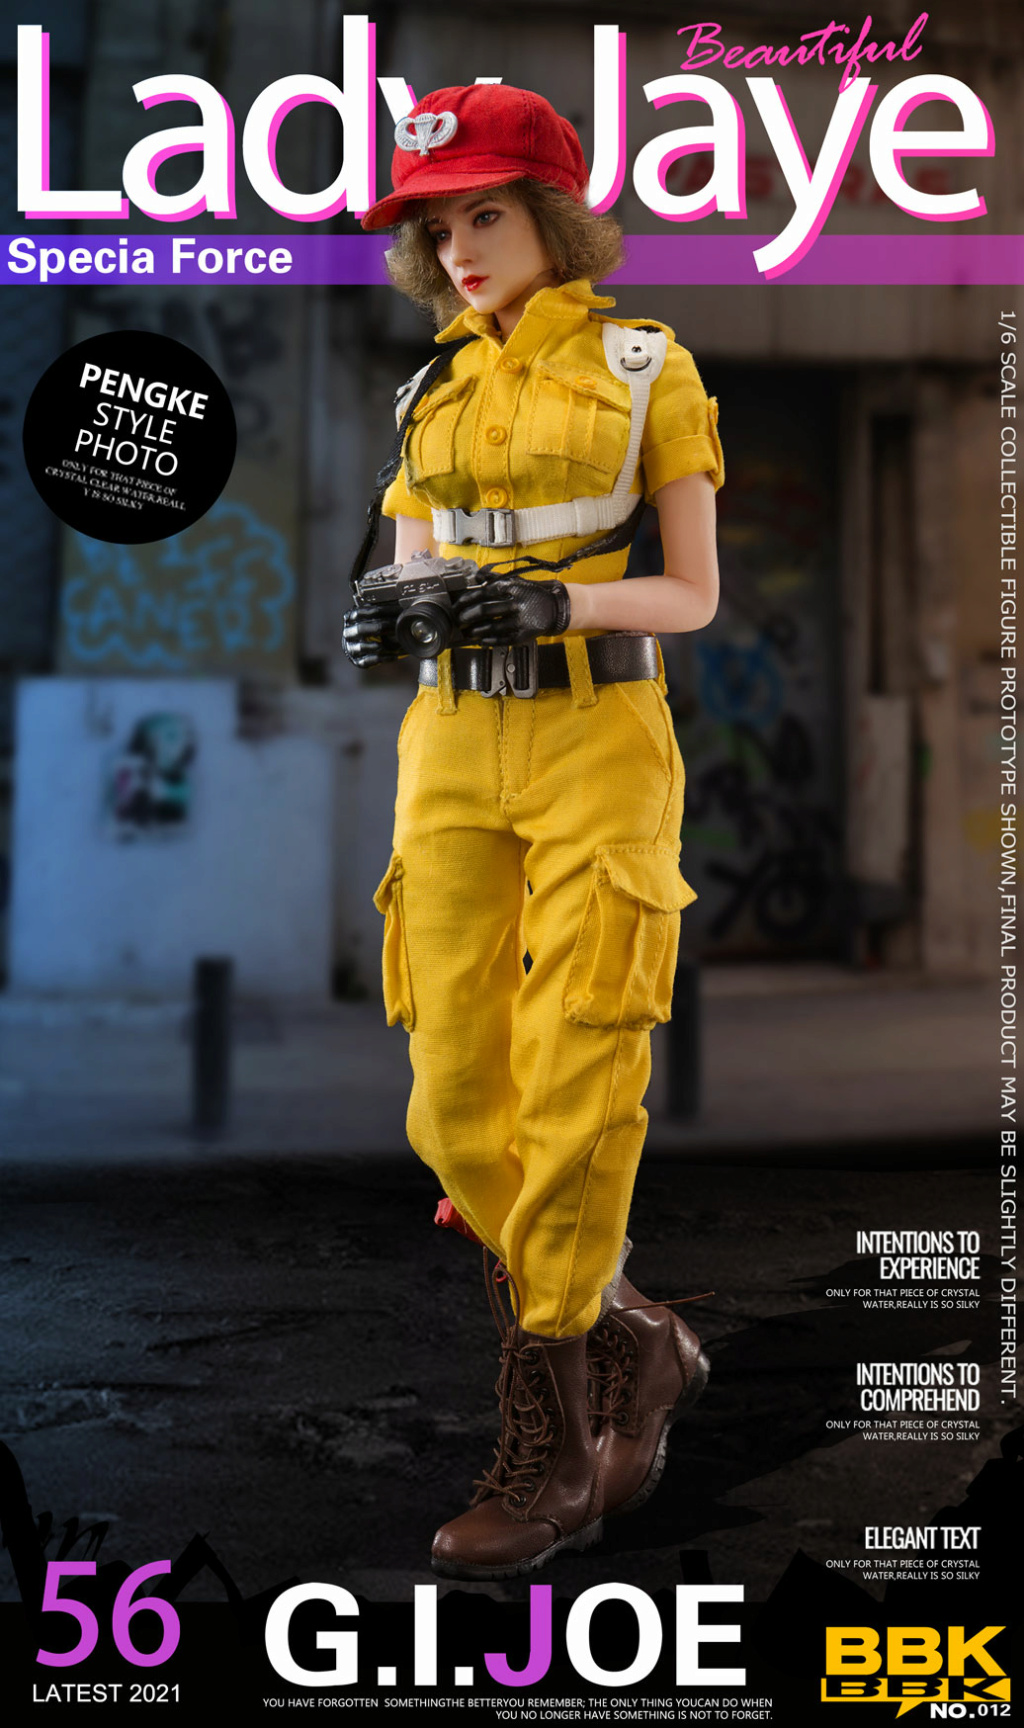 GIJoeJay - NEW PRODUCT: BBK: 1/6 GIJOE Jay Female Soldier Action Figure# 14580013